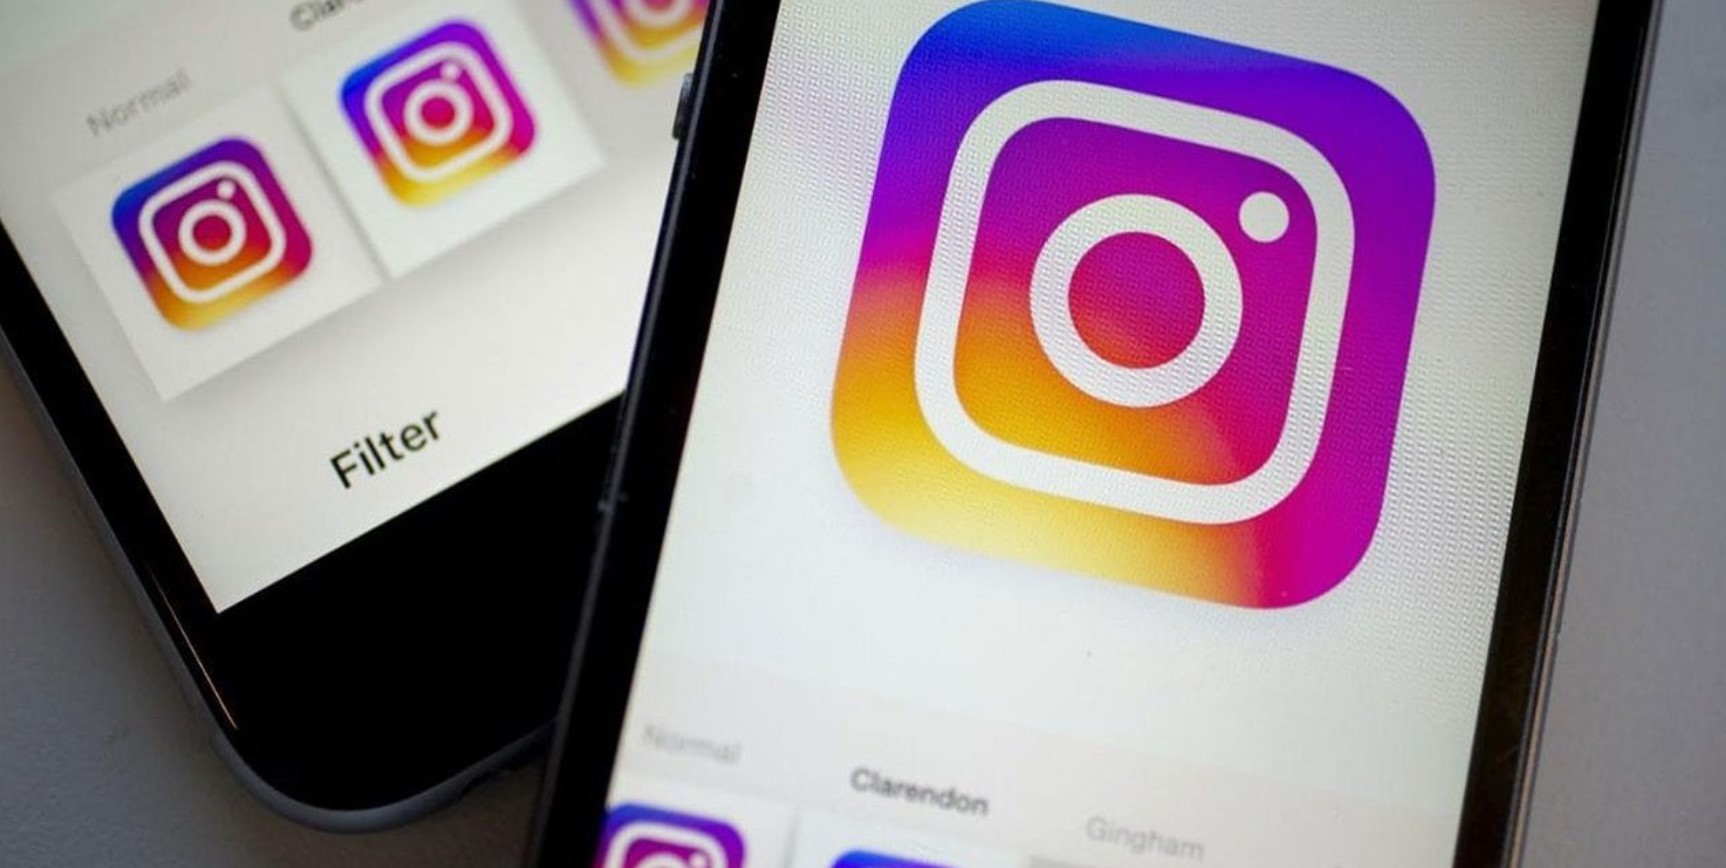 How To Enter Instagram Without An Account